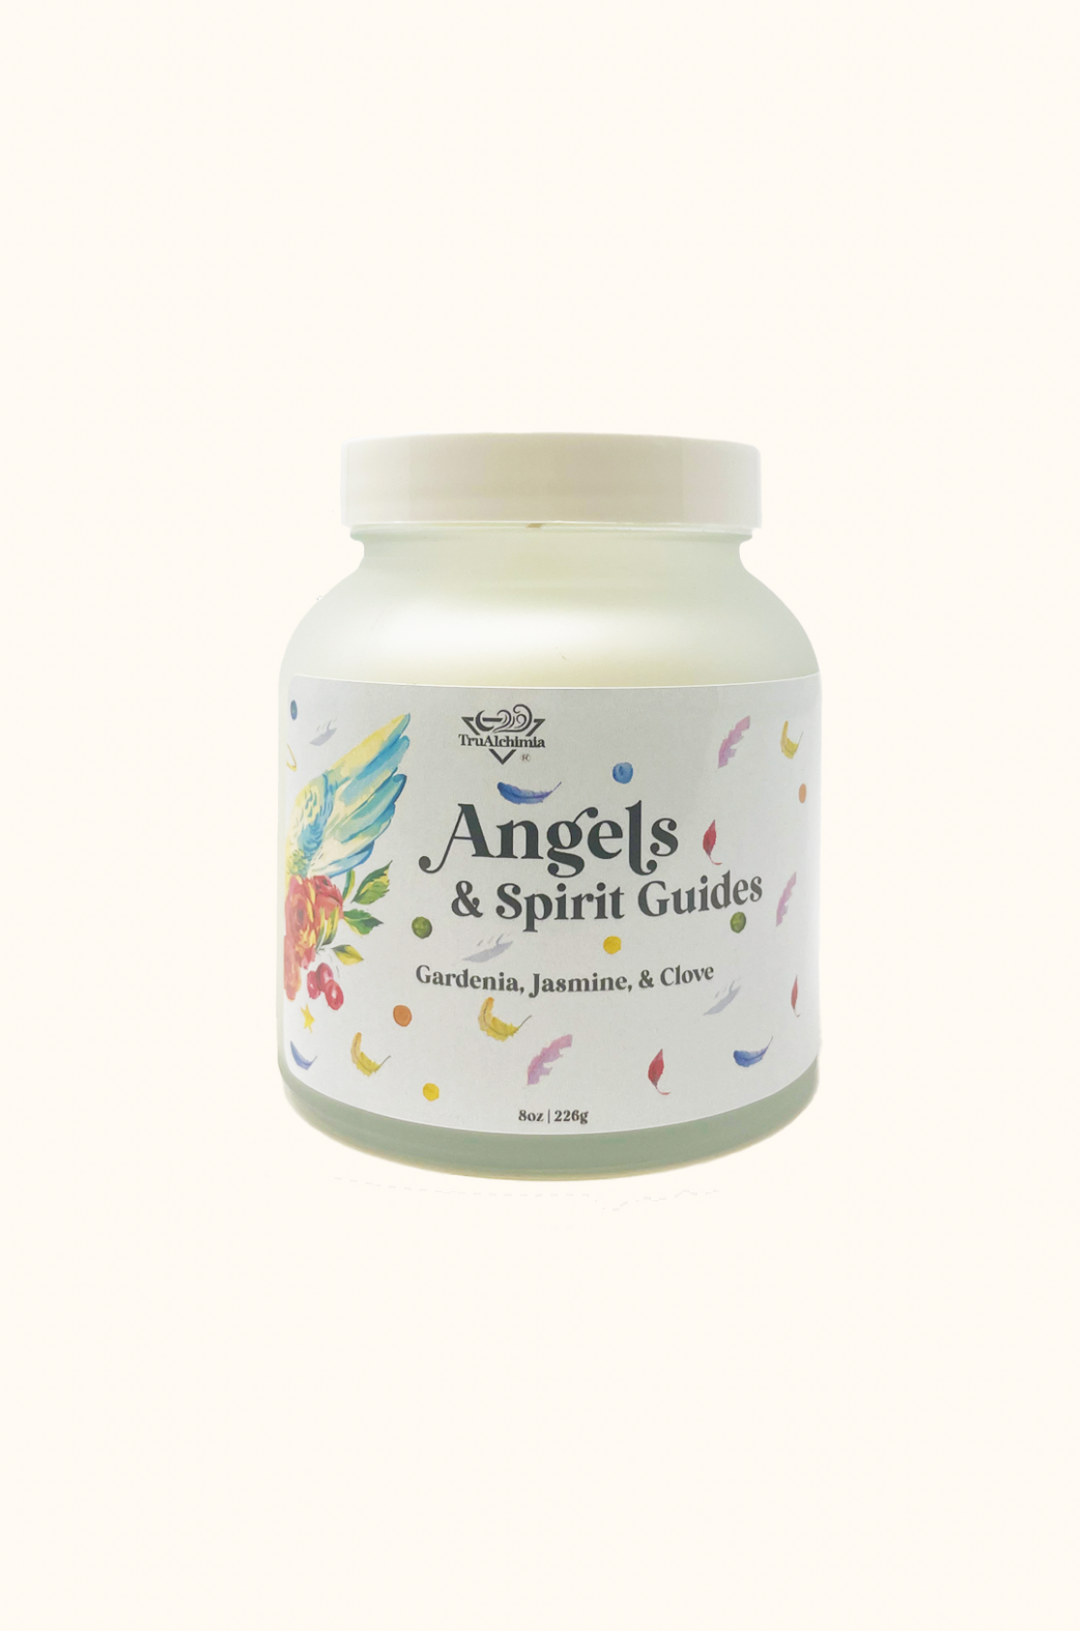 Angels & Spirit Guides Candle